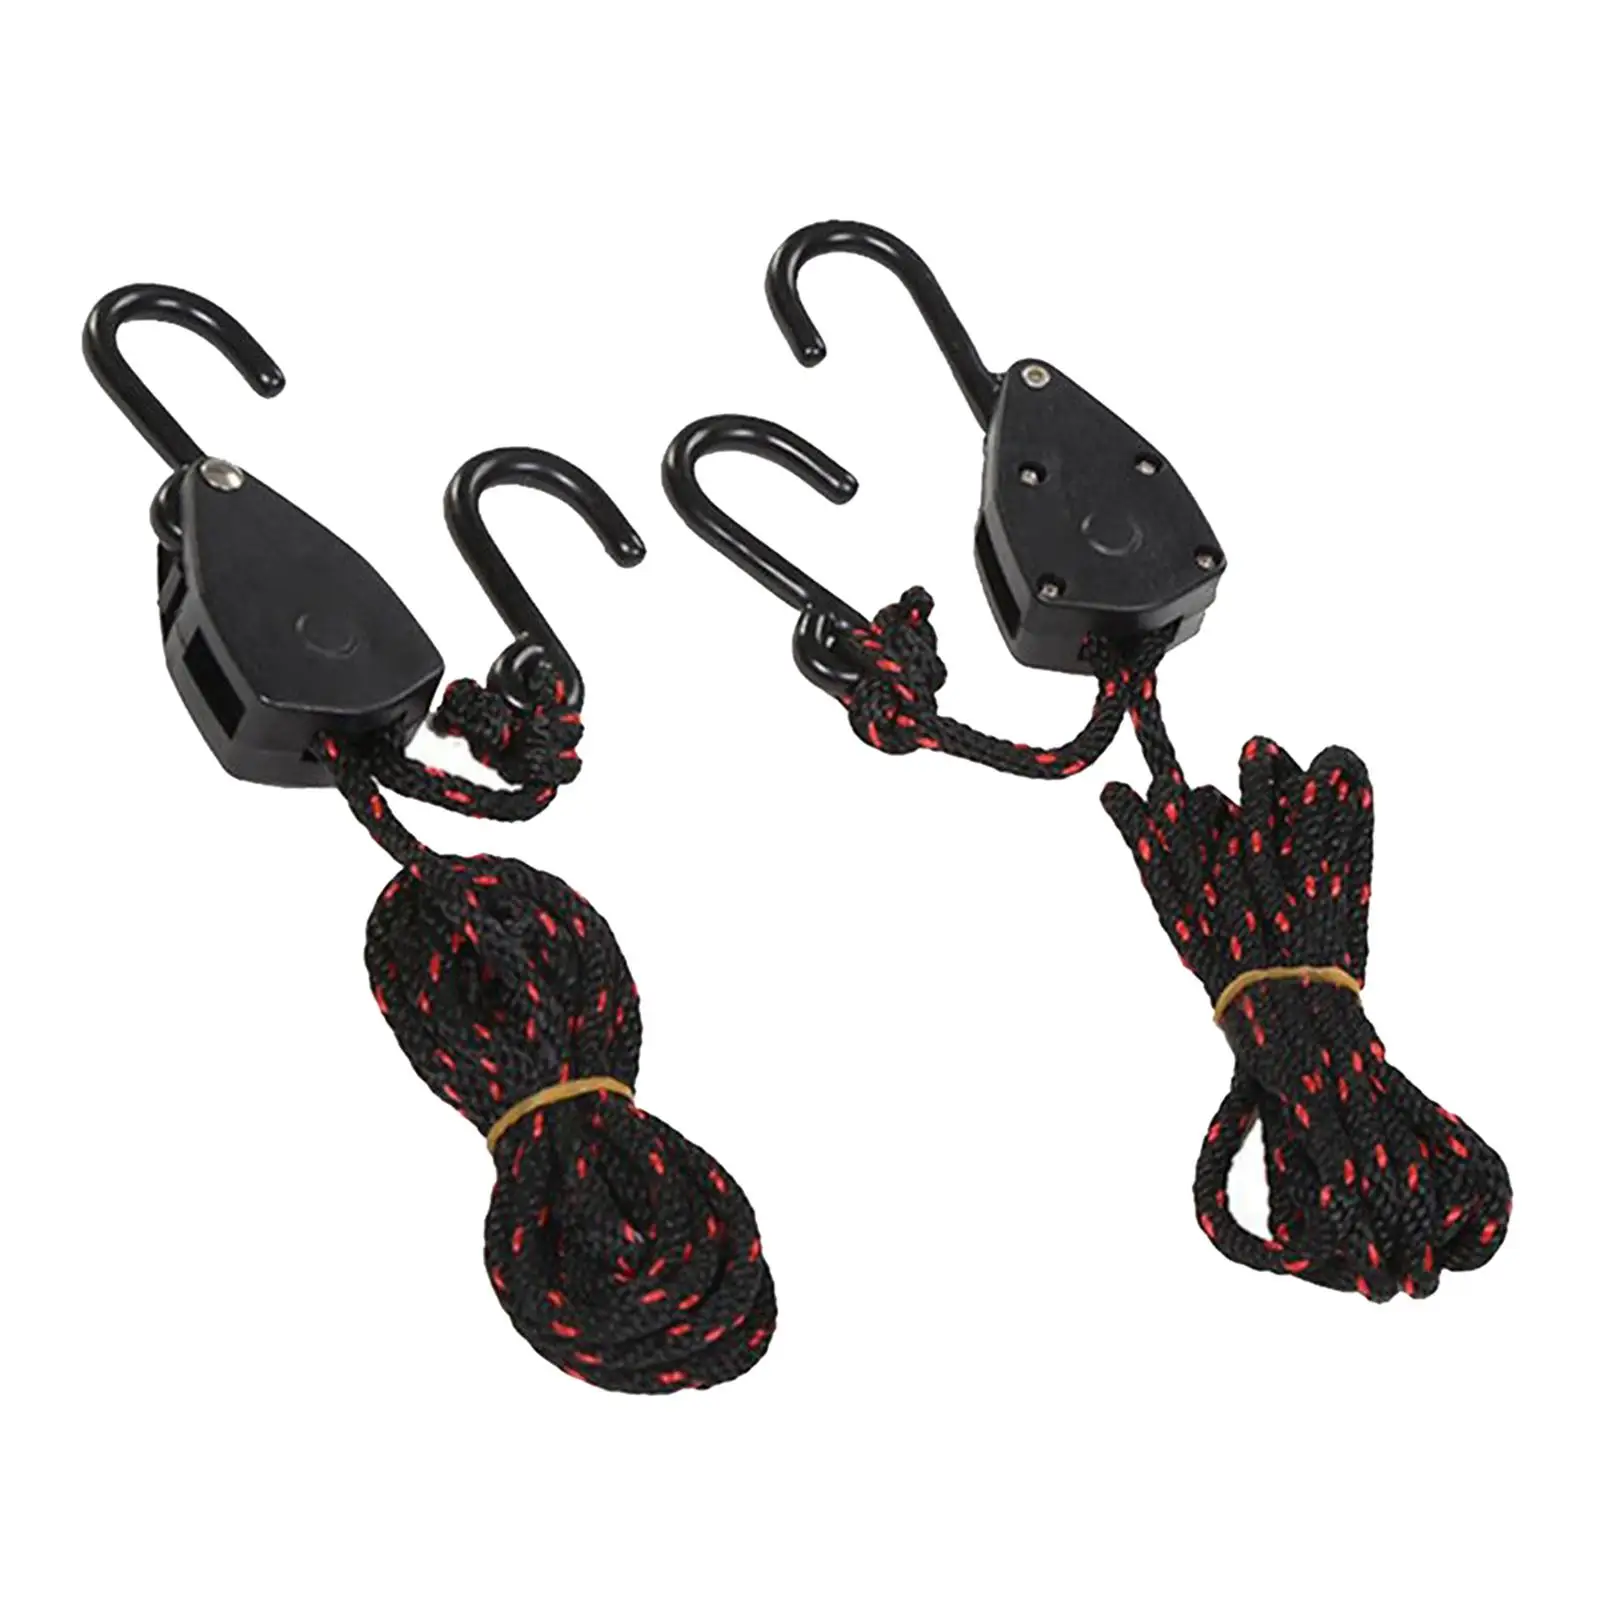 (Set of 2) - Ratchet Kayak and Canoe Bow and Stern Tie Down